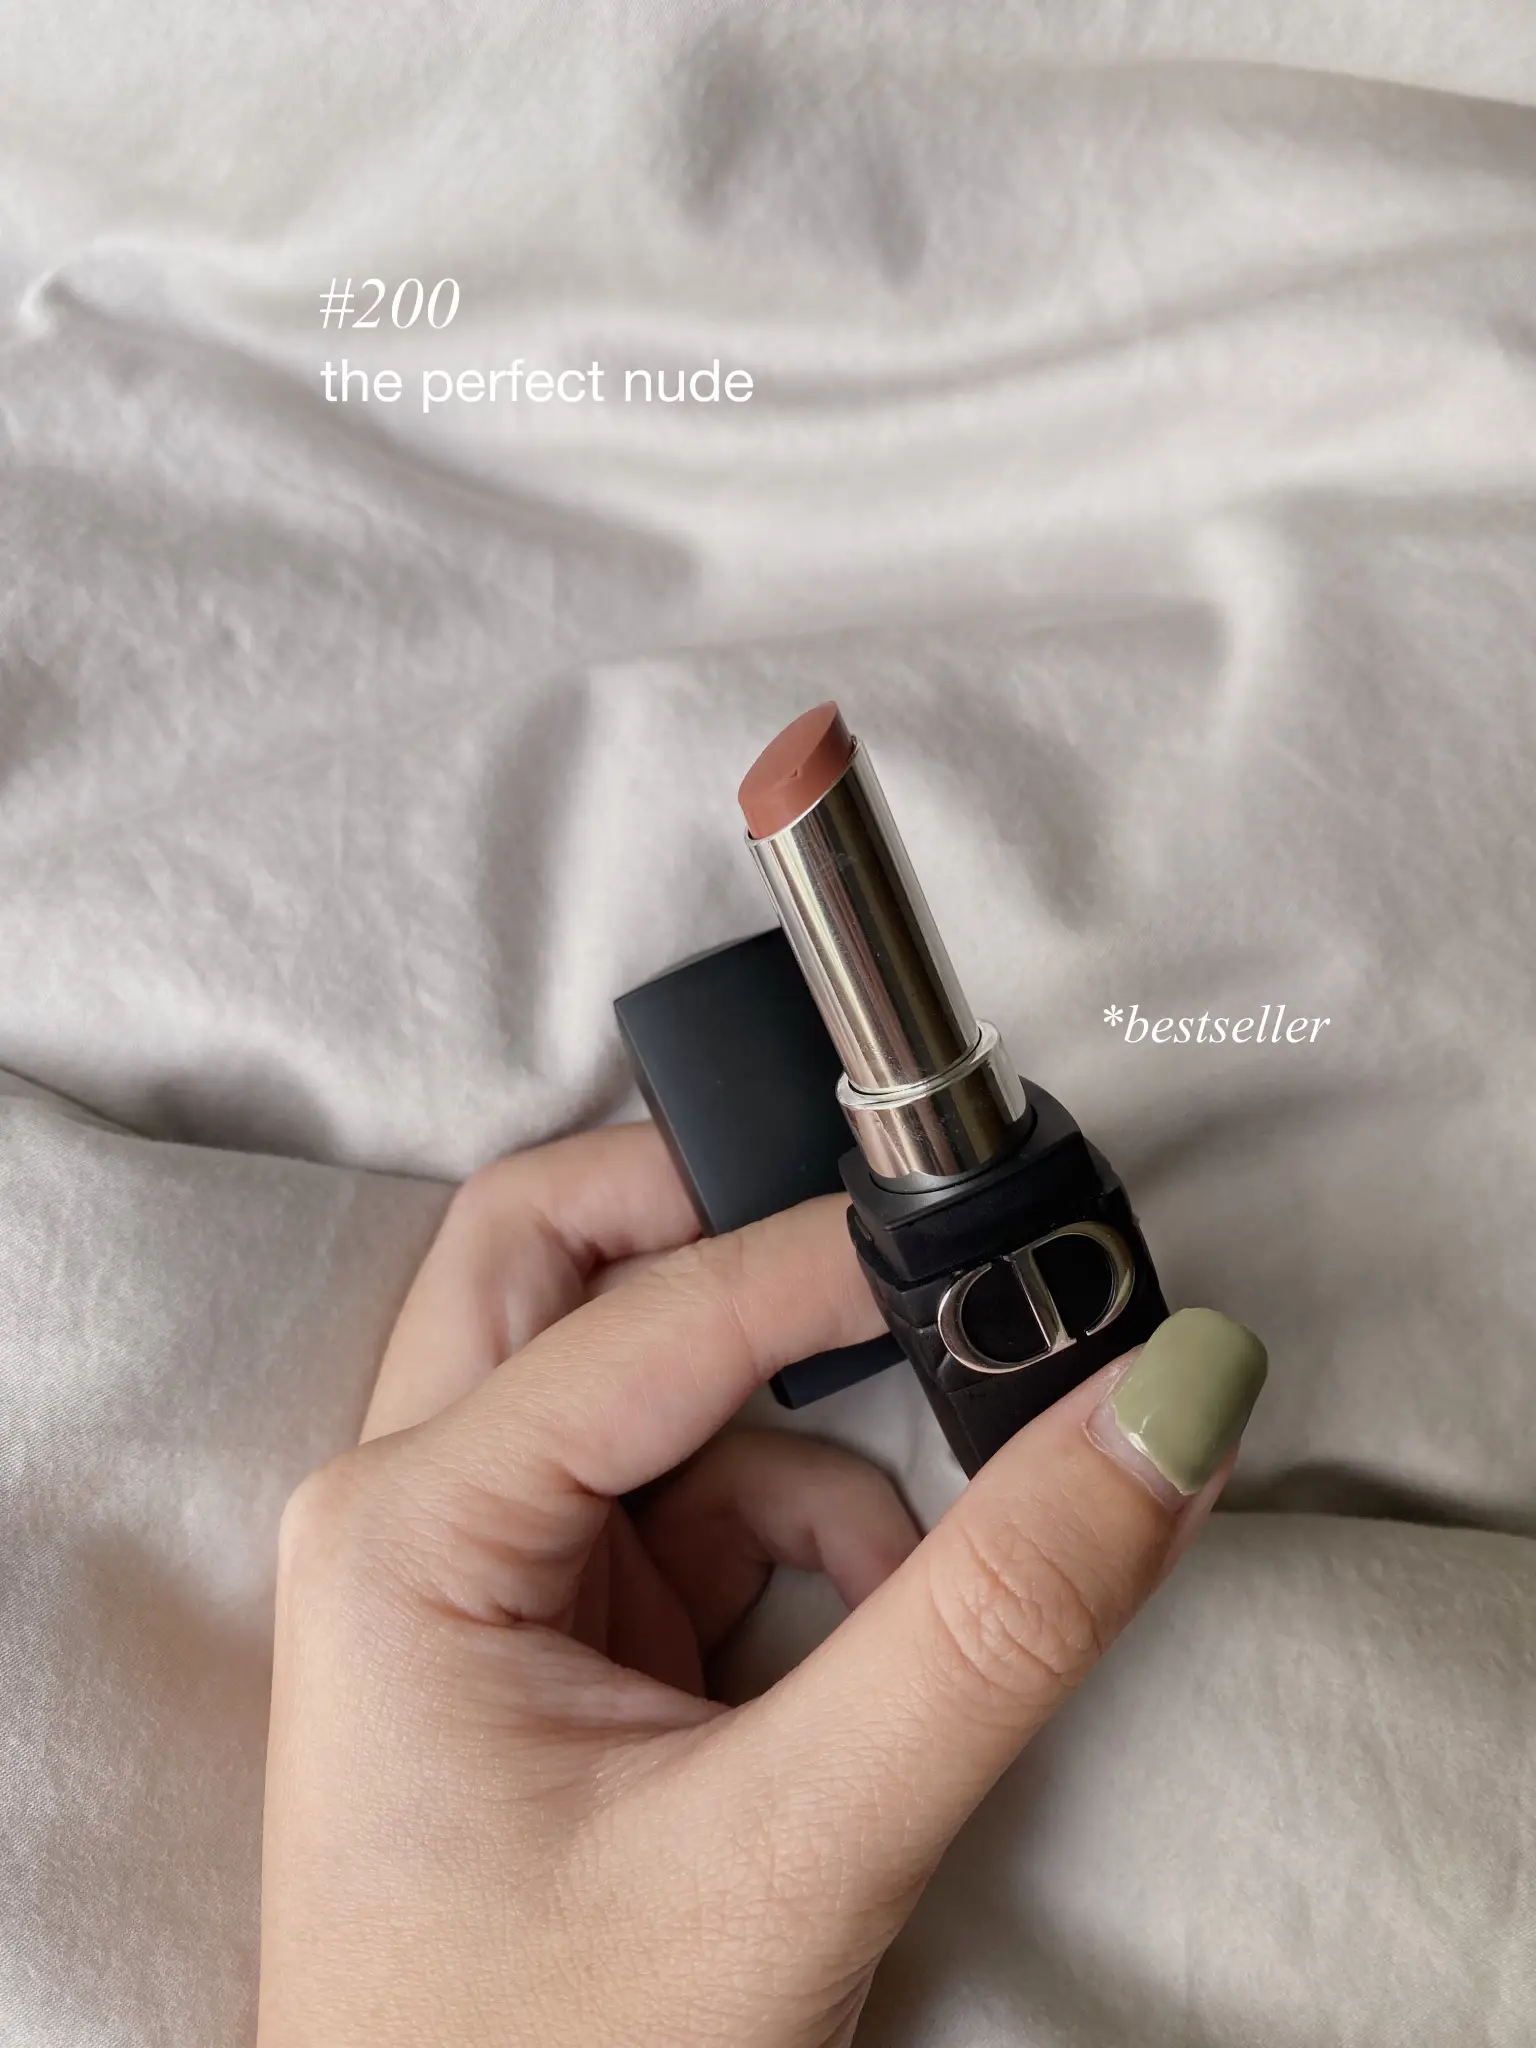 trying out dior's transfer-proof lipsticks 💋